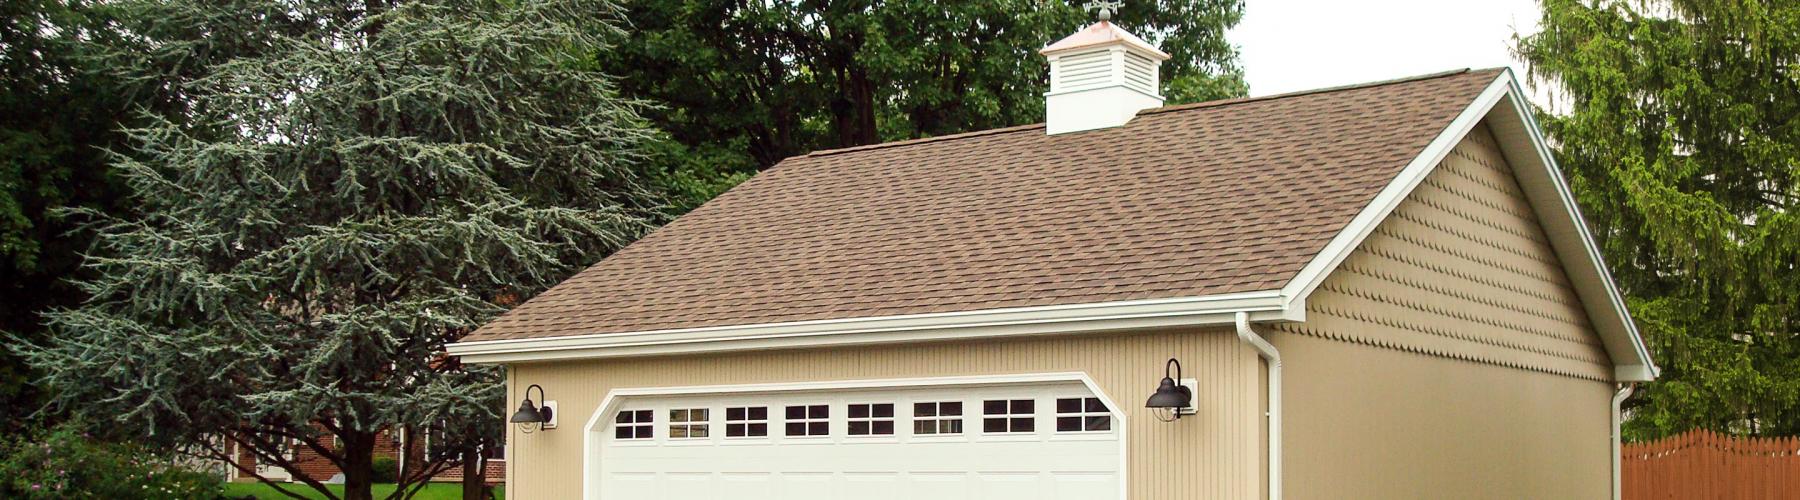 Stable Hollow construction builds residential garages.